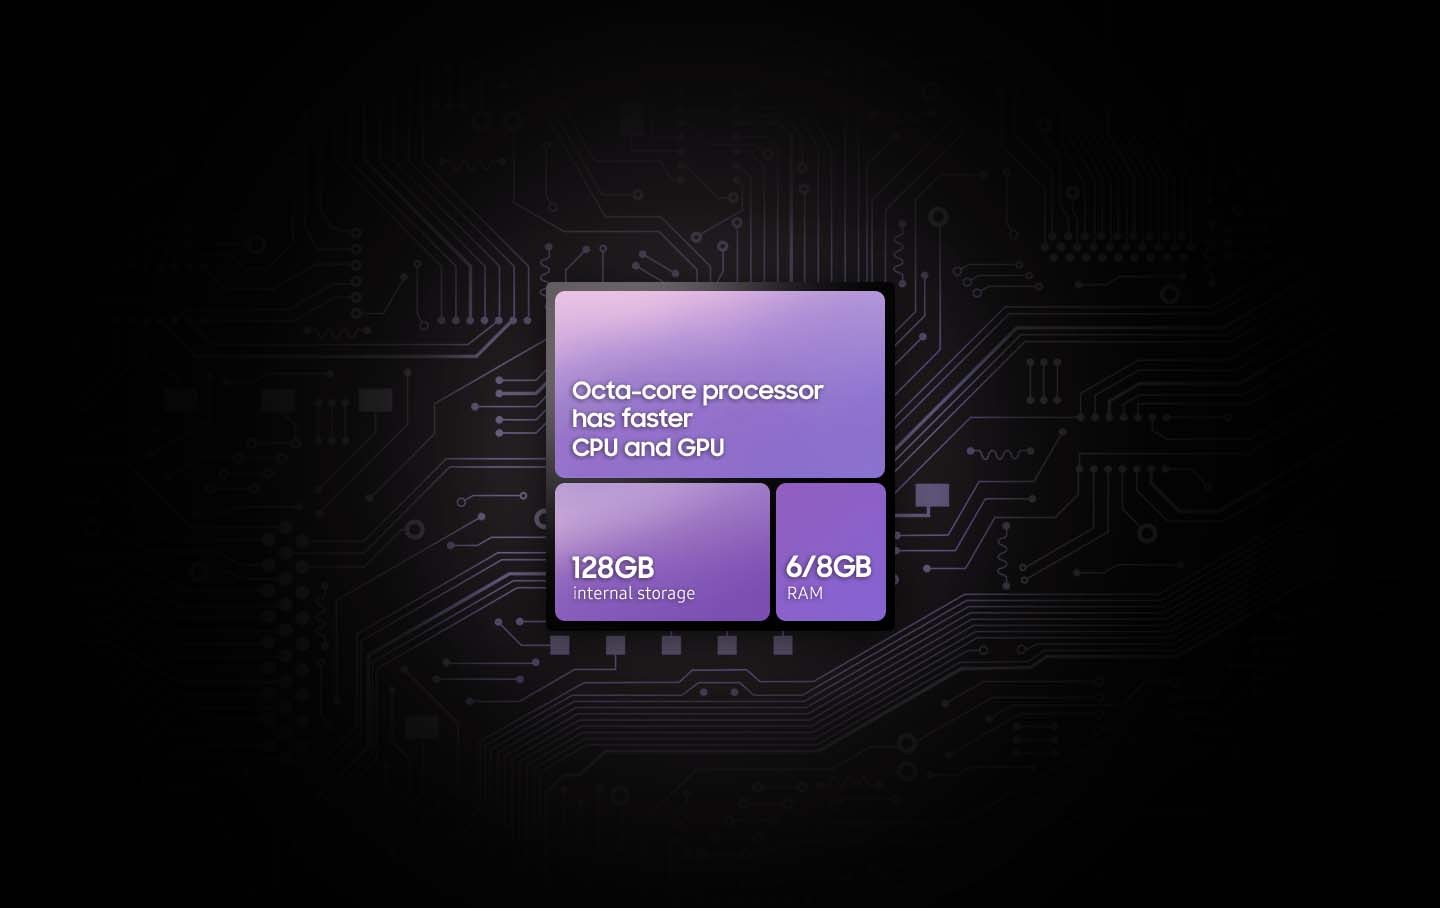 A purplish processing chip, in front of complex circuitry in a dark background, is divided into an upper half, a bigger left bottom half and a small right bottom half. On the upper half, text reads Octa-core processor has faster CPU and GPU. On the left bottom, text reads, 128GB internal storage and the right bottom half reads 6/8GB RAM.